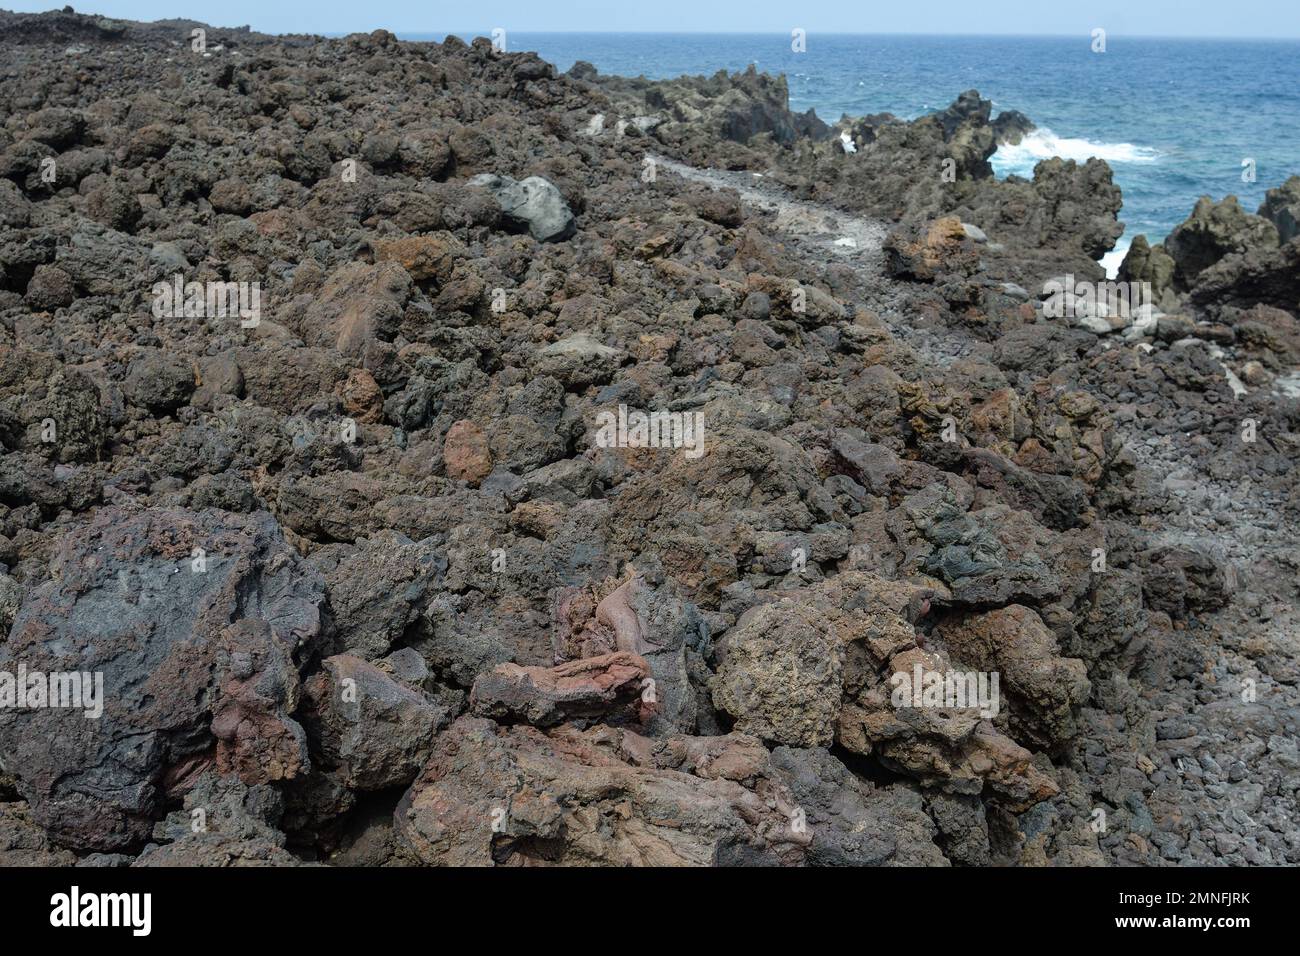 Volcanic rock cliffs eroded by the sea in Lanzarote Stock Photo